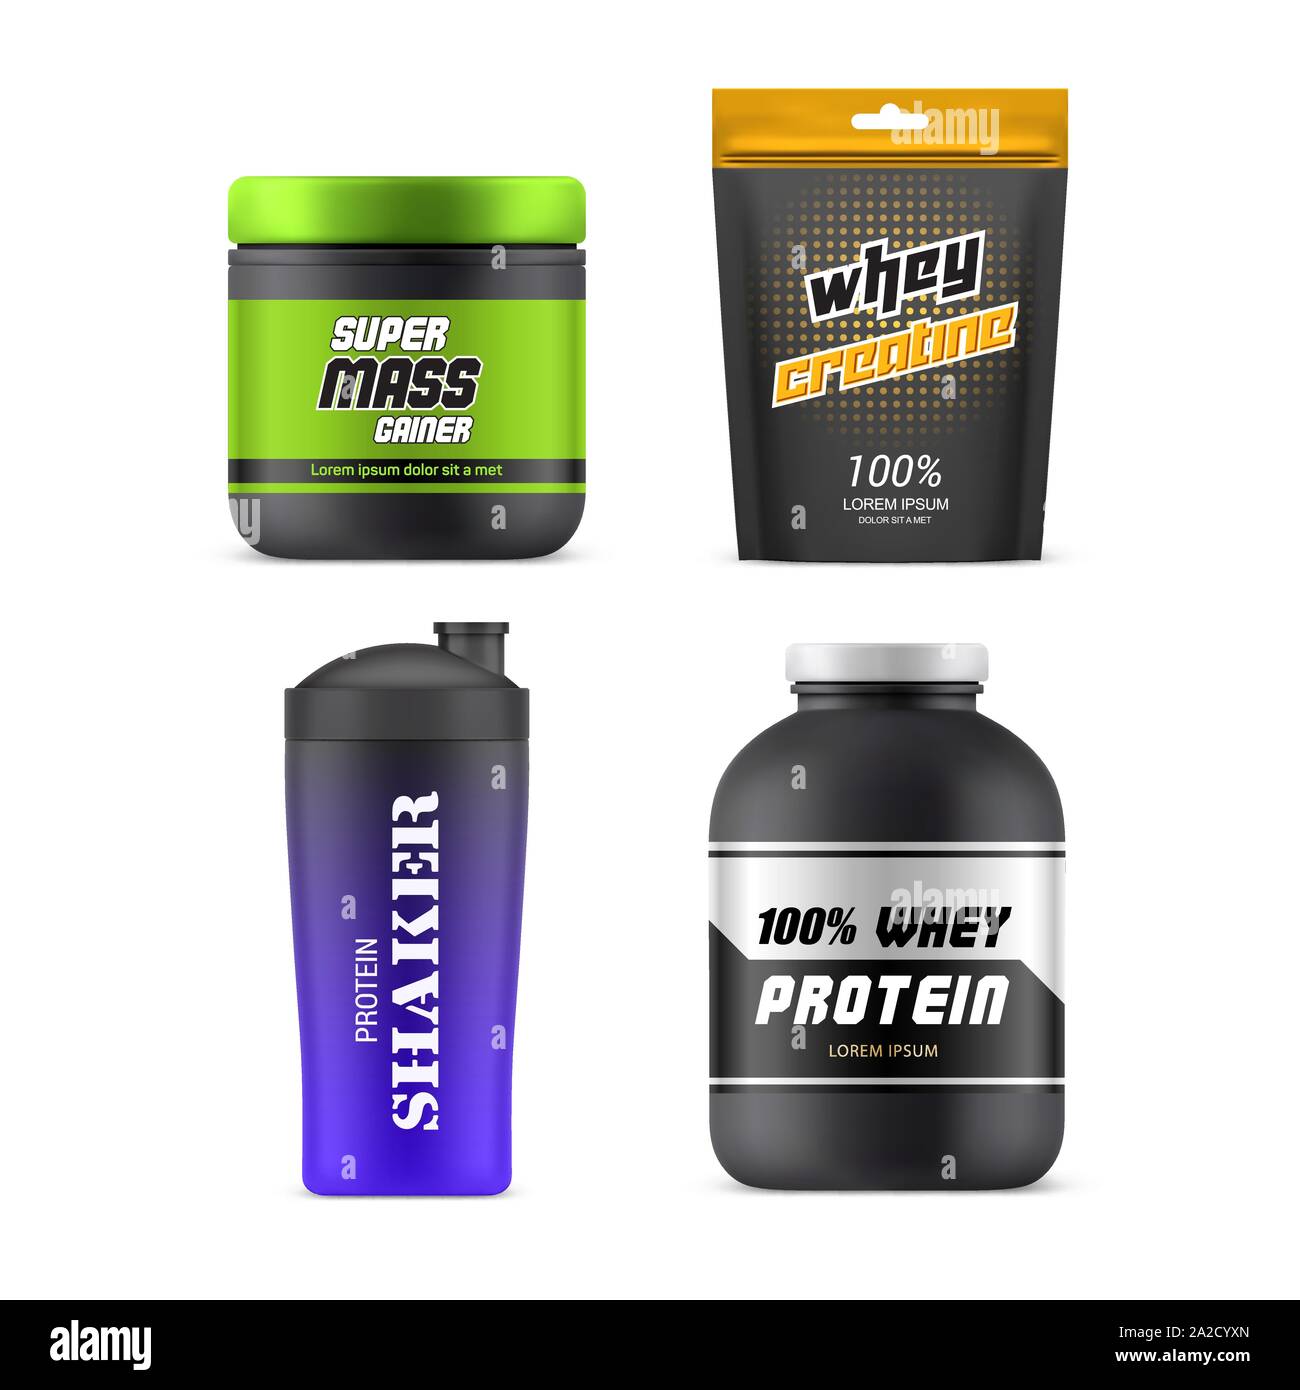 Download Protein Supplement Jar Design High Resolution Stock Photography And Images Alamy